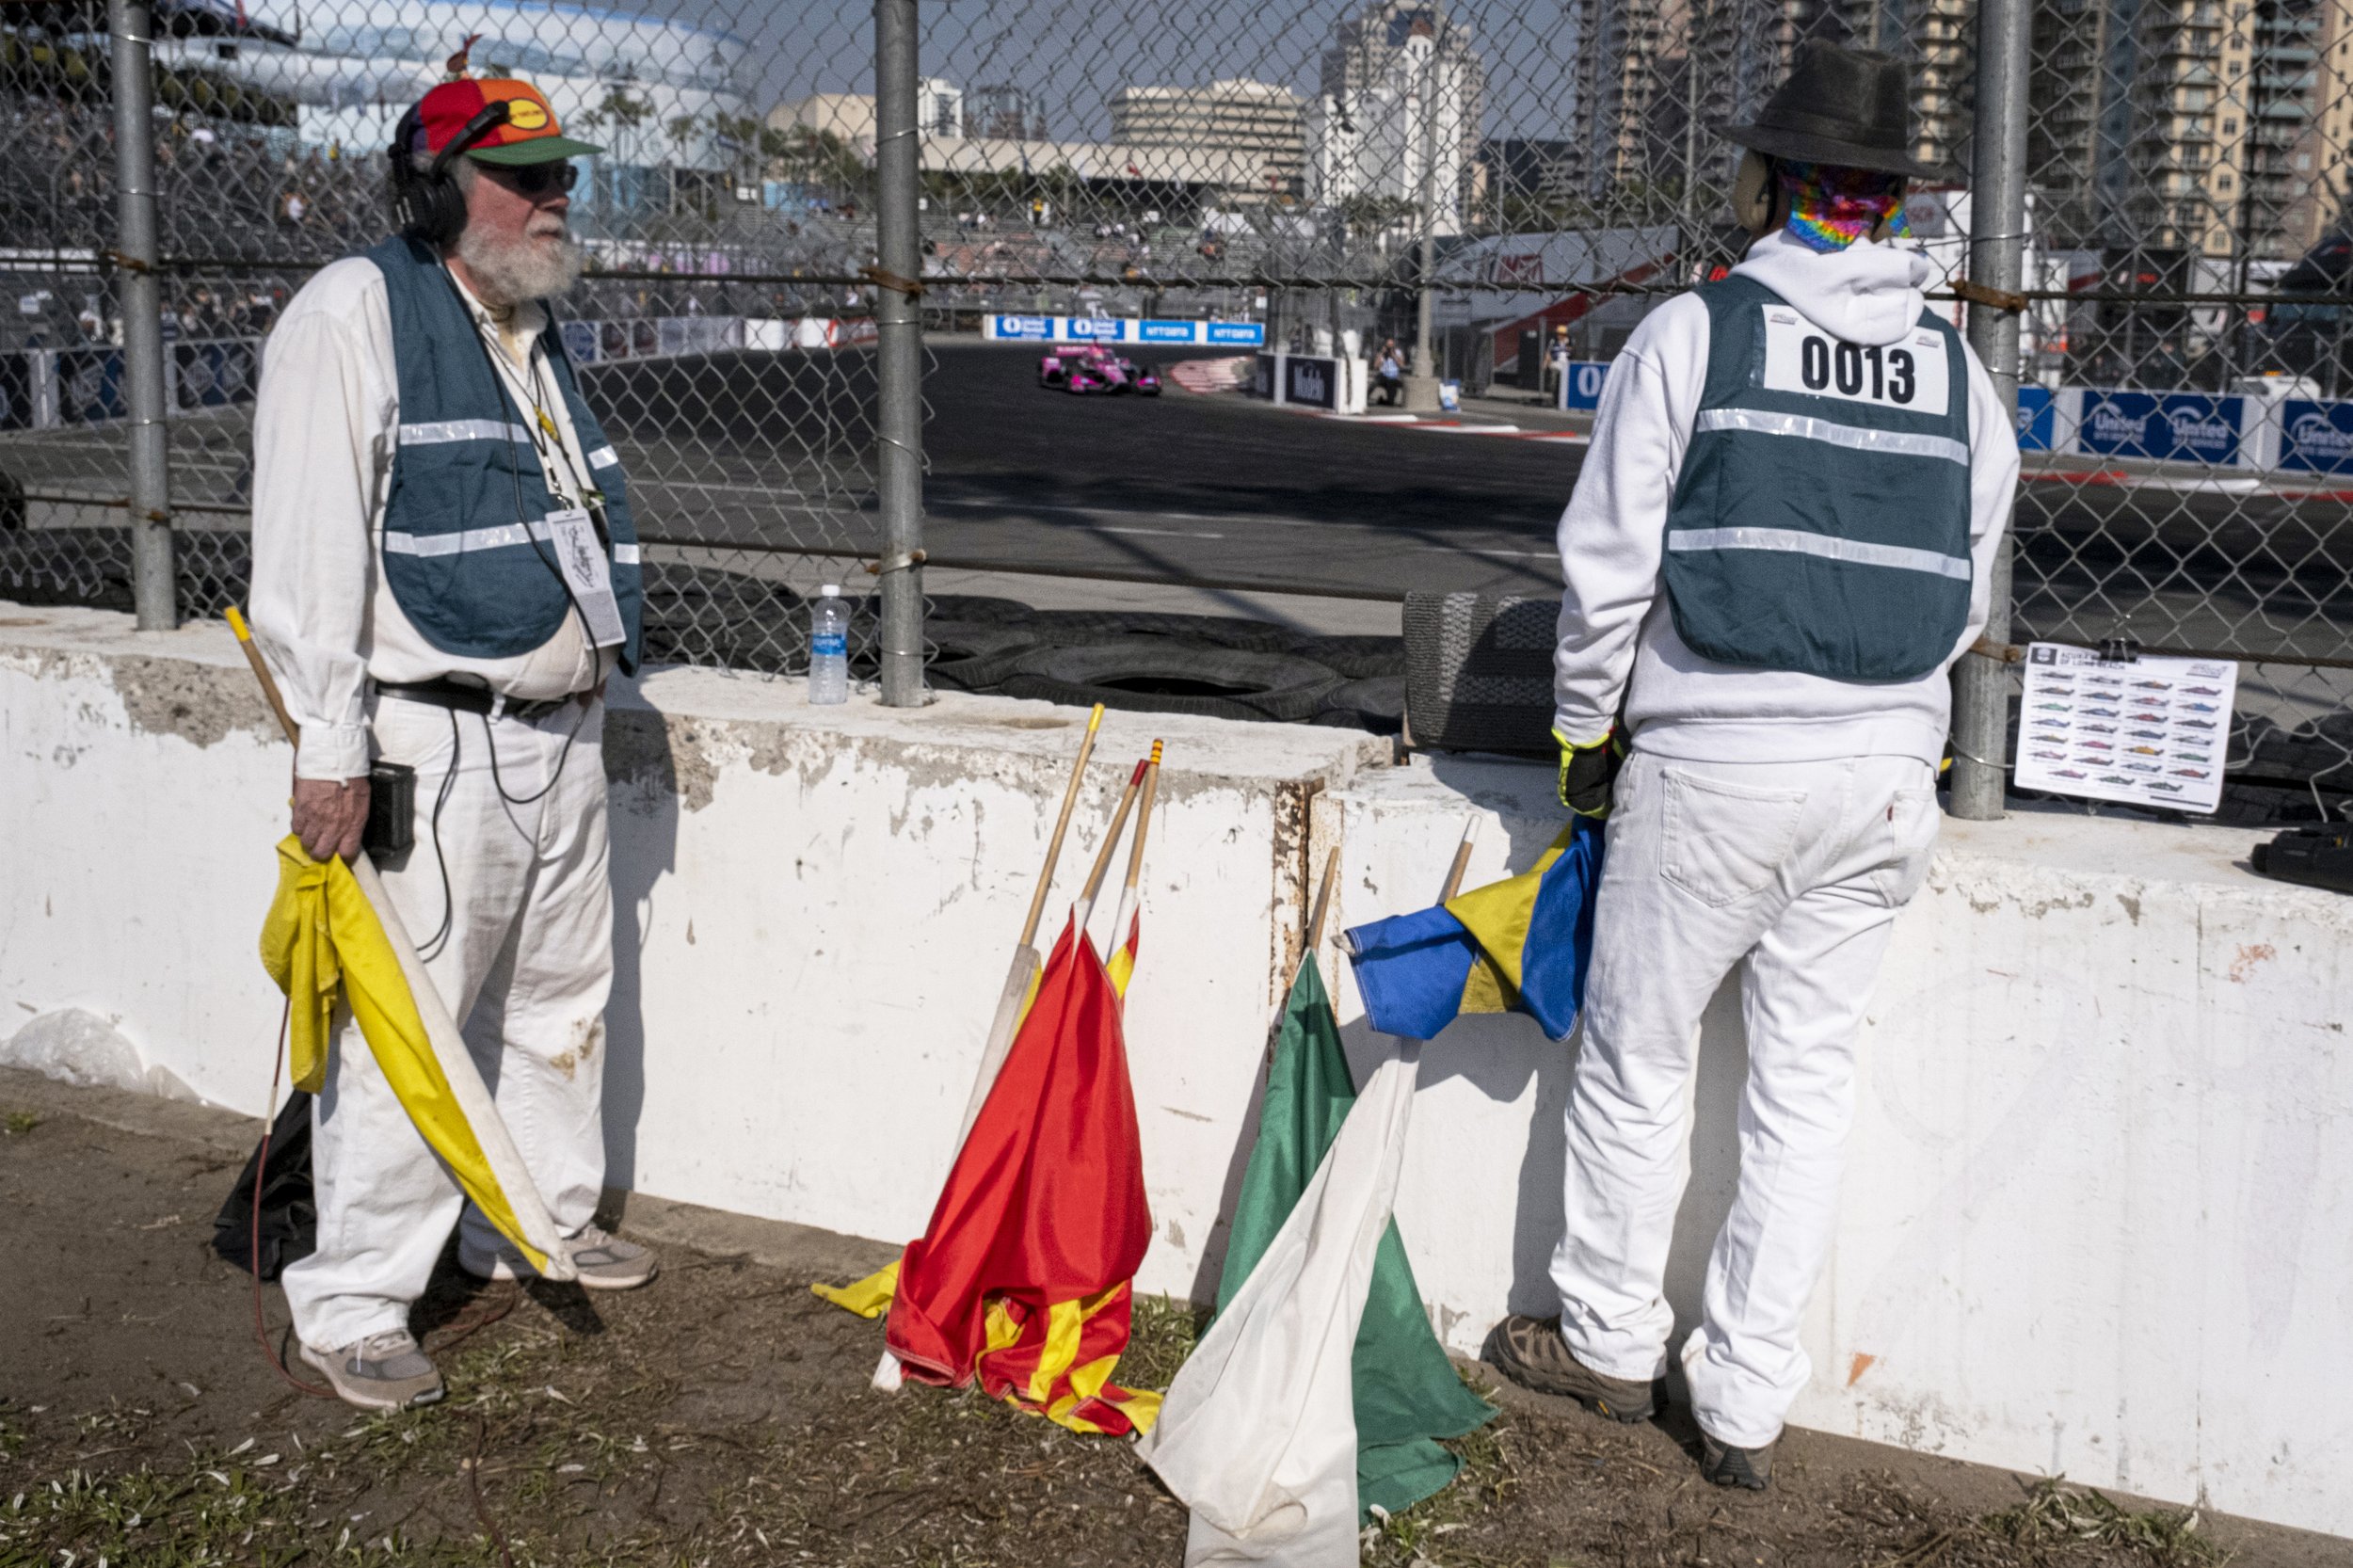  Racing marshals watch the race, and stand by flags which colors corrospond and signal different conditions. 48th Annual Acura Grand Prix in Long Beach, Calif. on Sat., April 15, 2023. (Anna Sophia Moltke | The Corsair) 